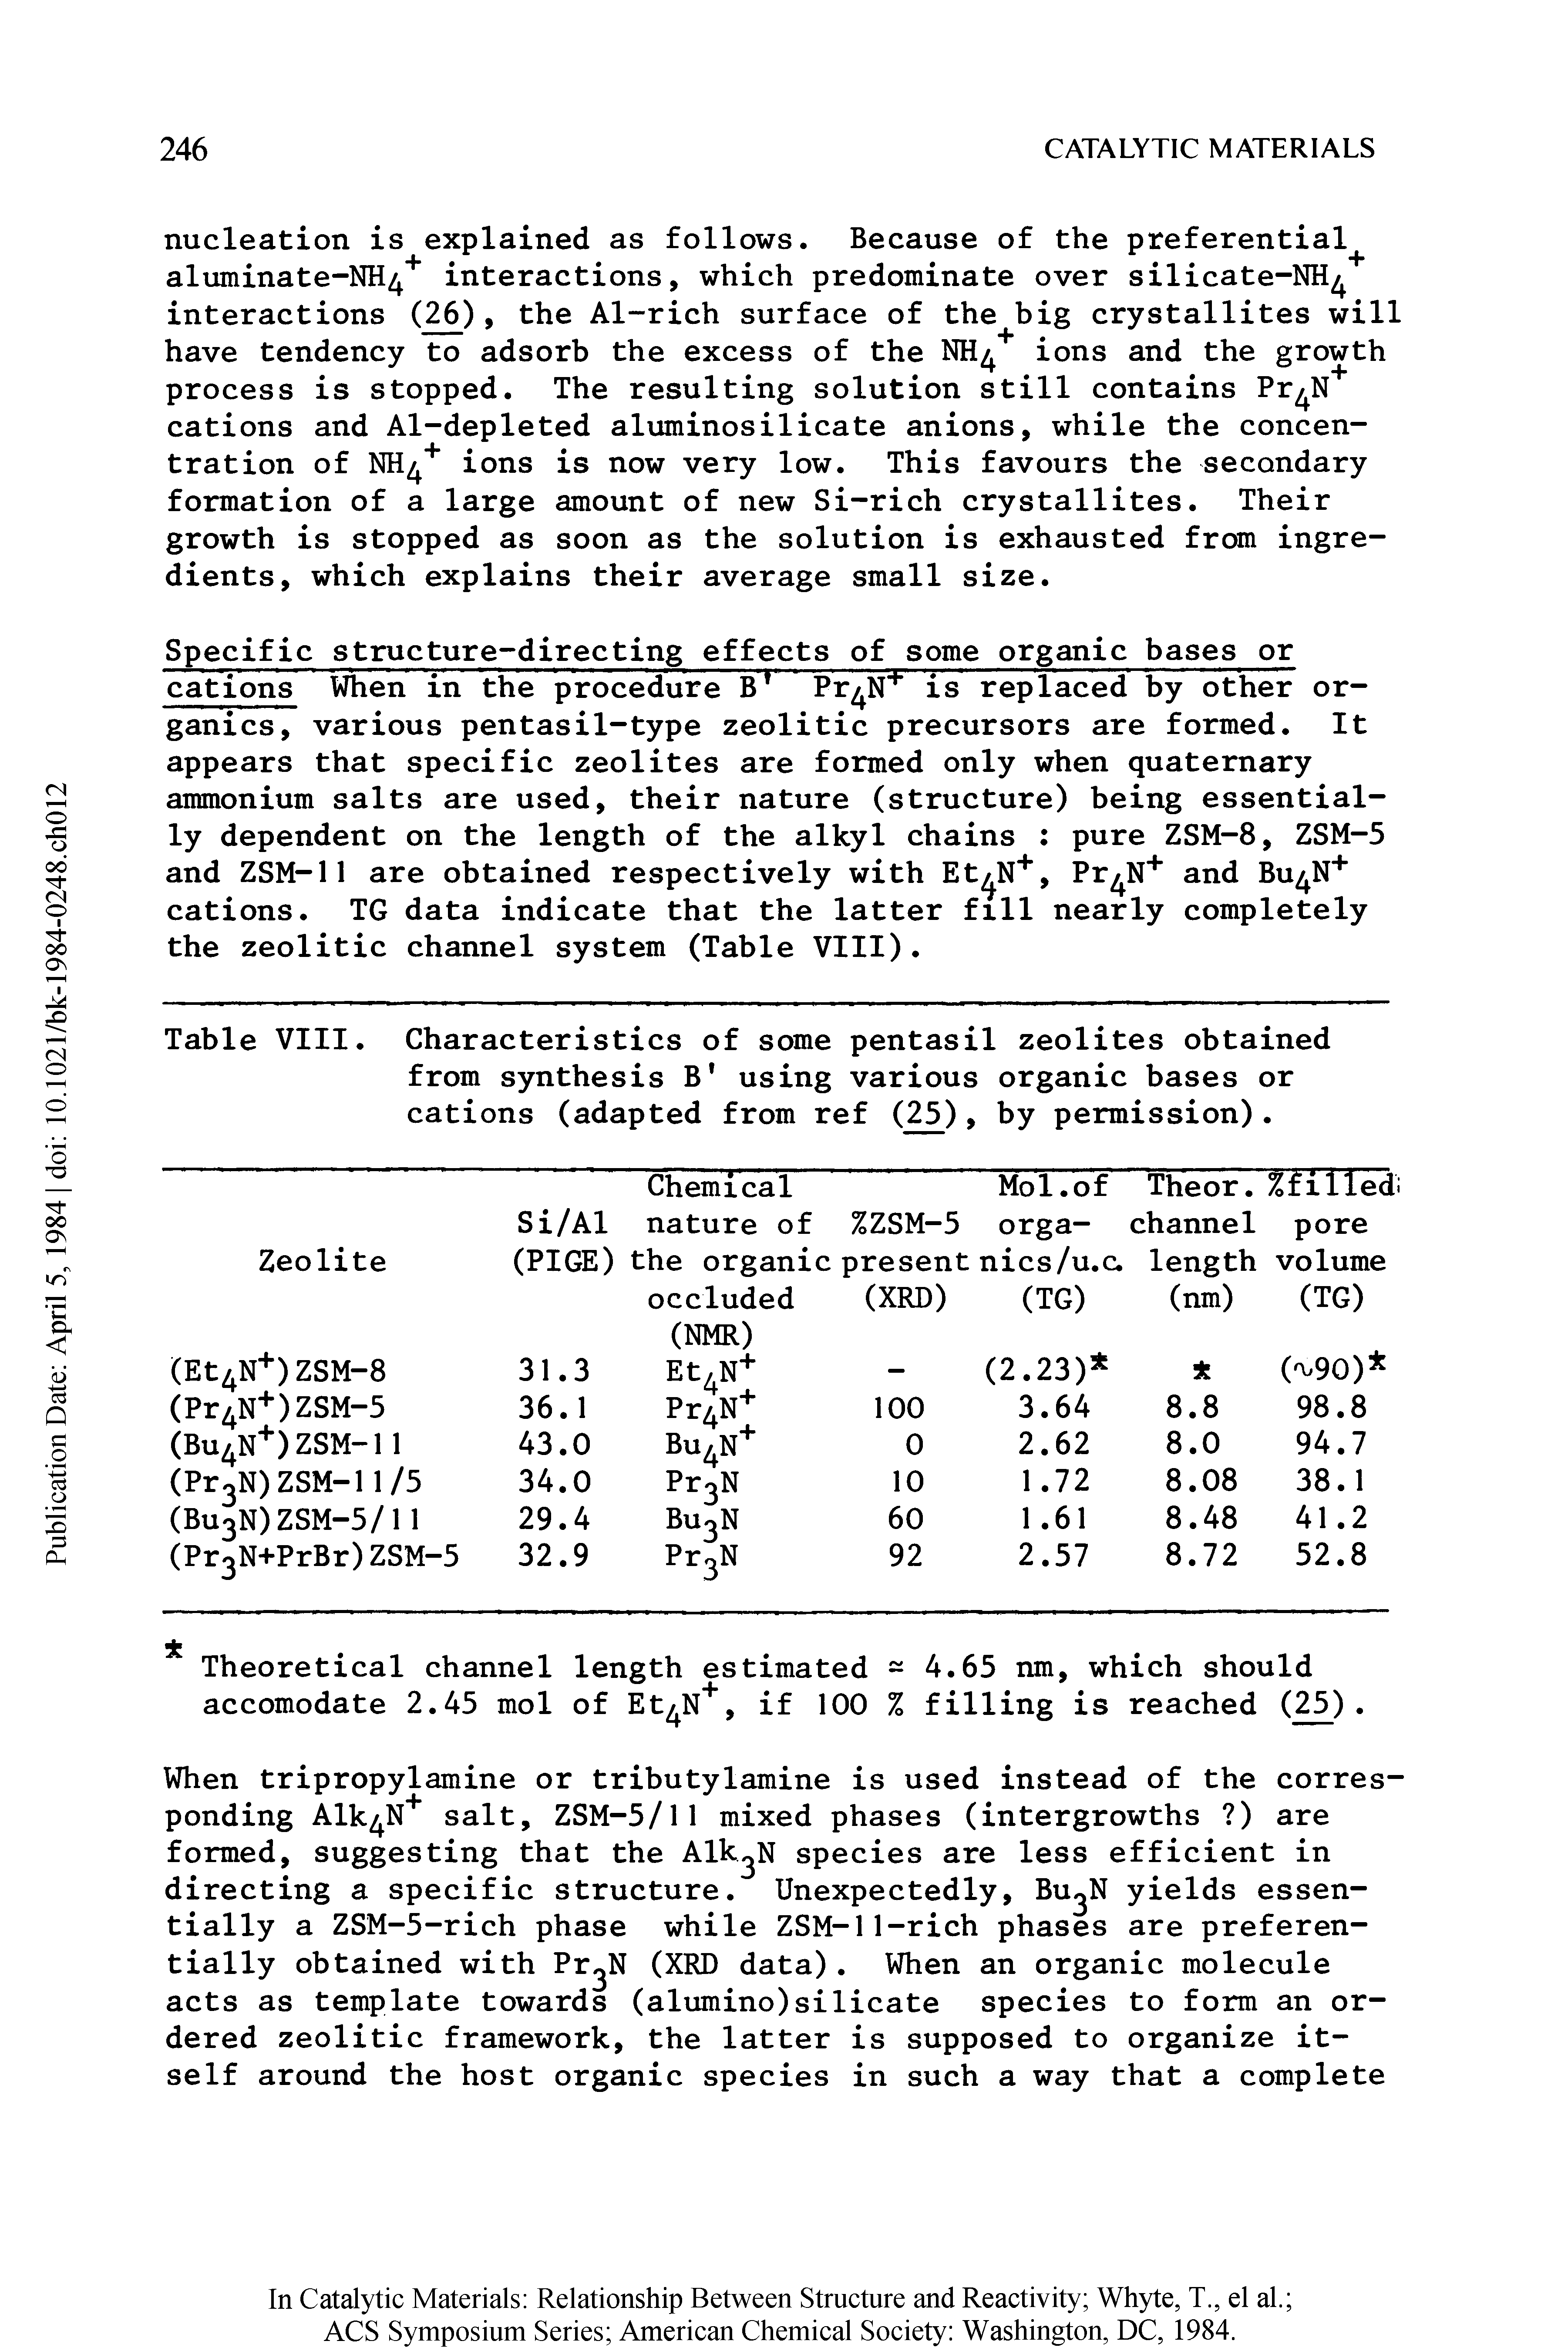 Table VIII. Characteristics of some pentasil zeolites obtained from synthesis B using various organic bases or cations (adapted from ref (25), by permission).